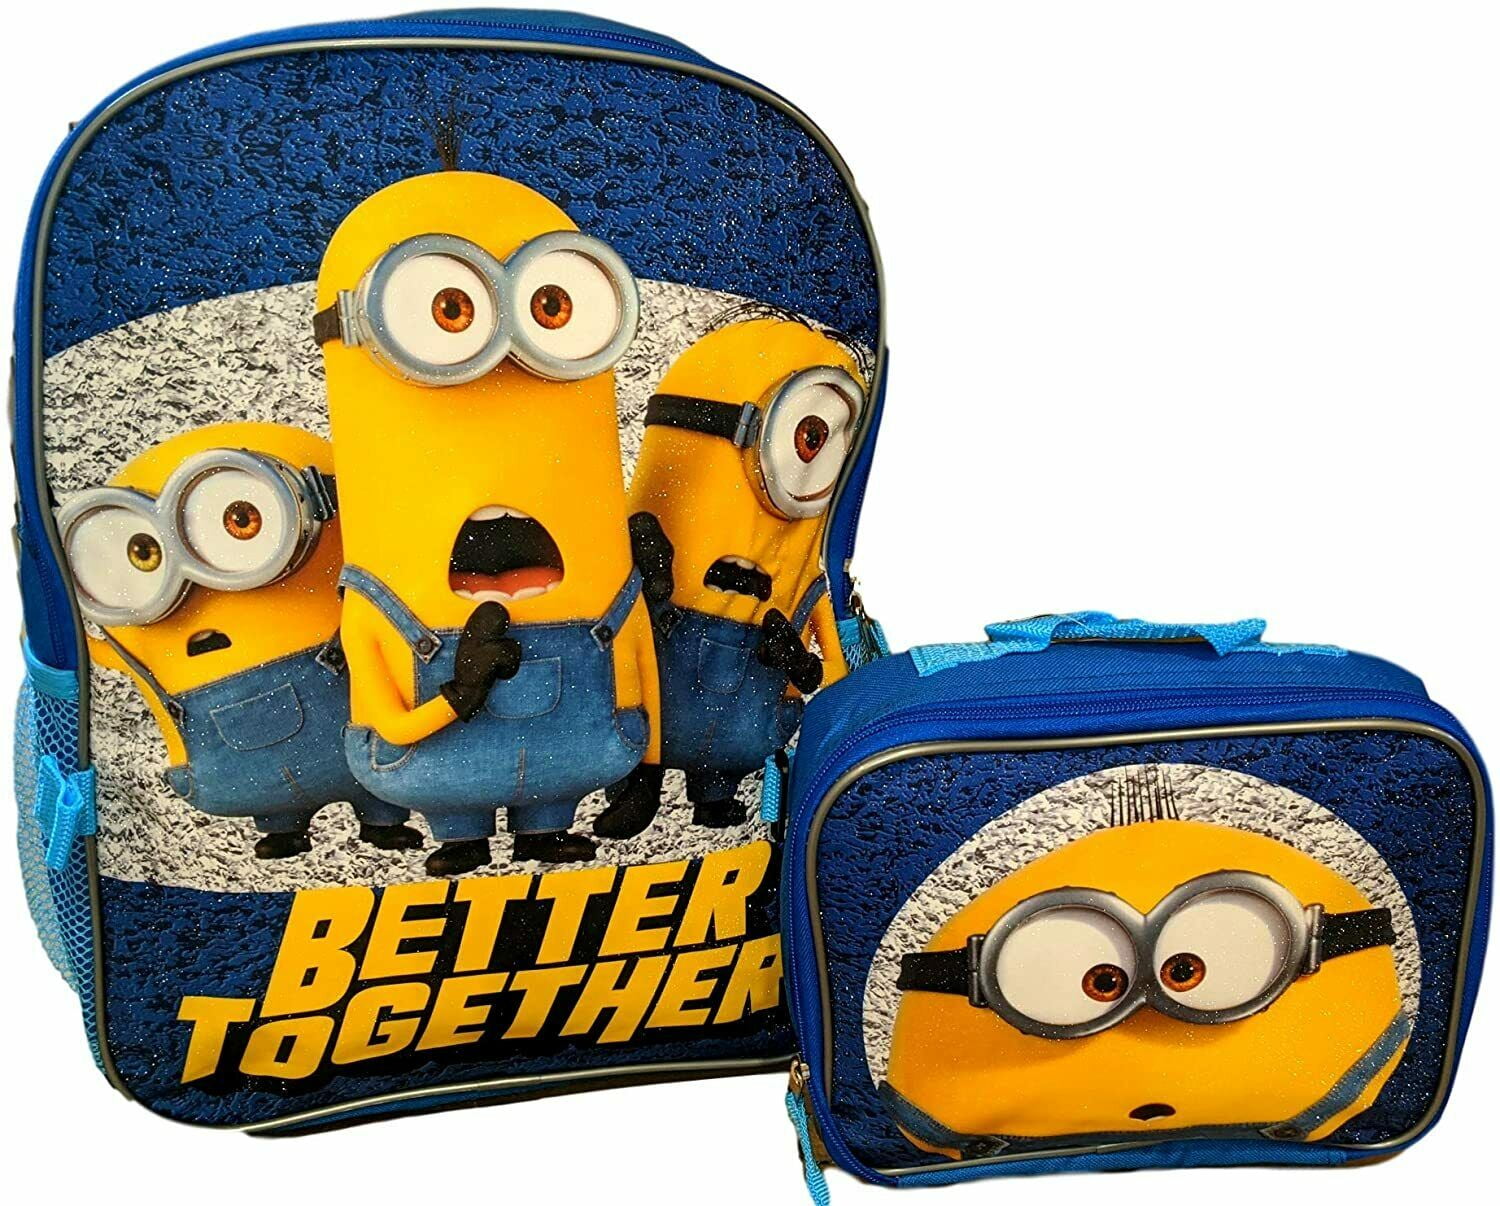 Despicable Me Assemble the Minions School Backpack - Groovy Kids Gear